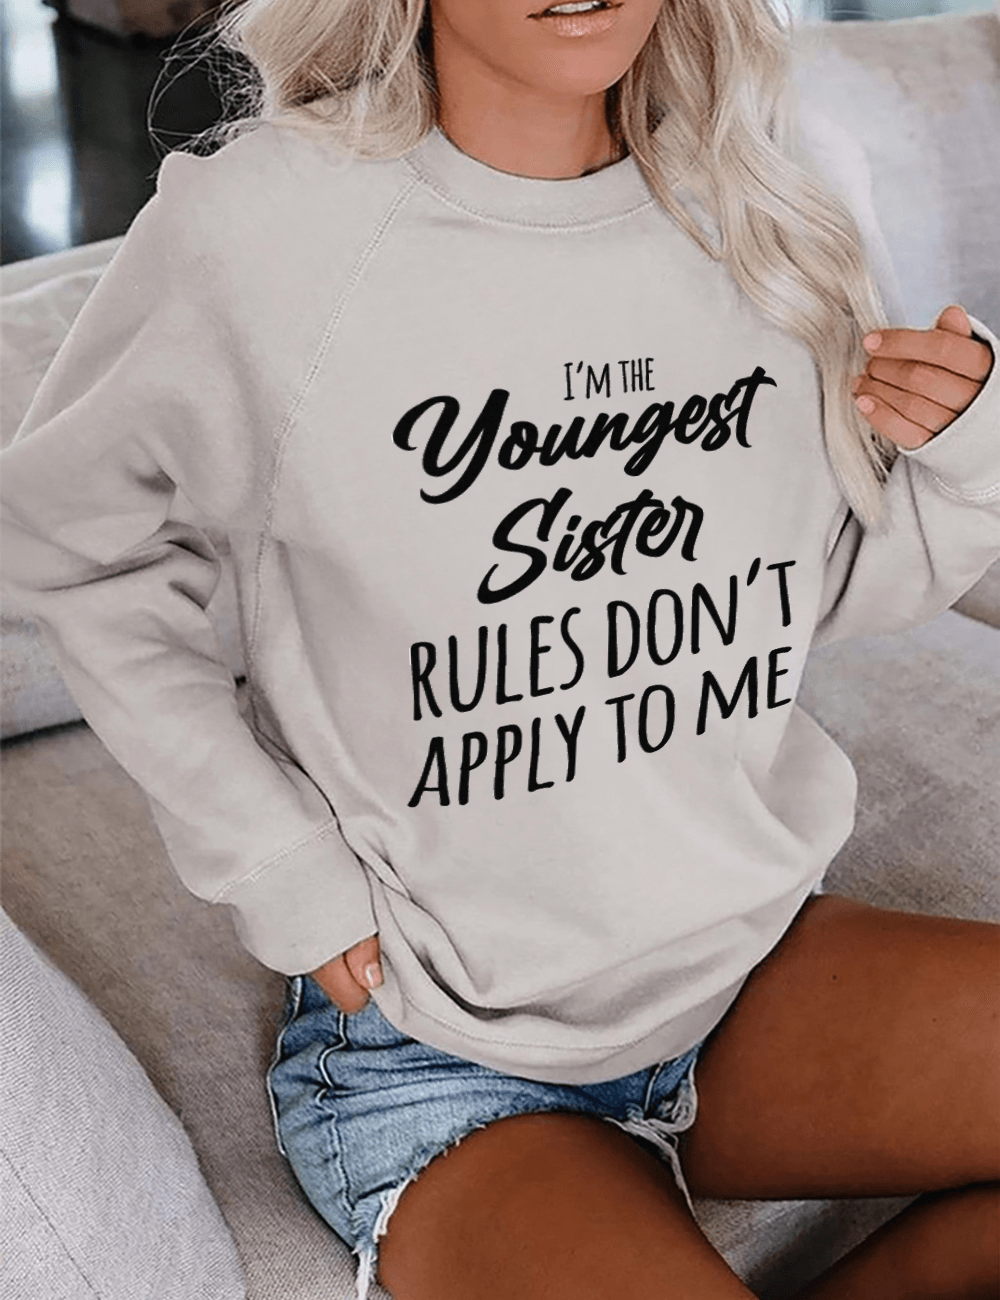 I'm The Youngest Sister Rules Don't Apply To Me White Cotton Sweatshirt - prettyspeach